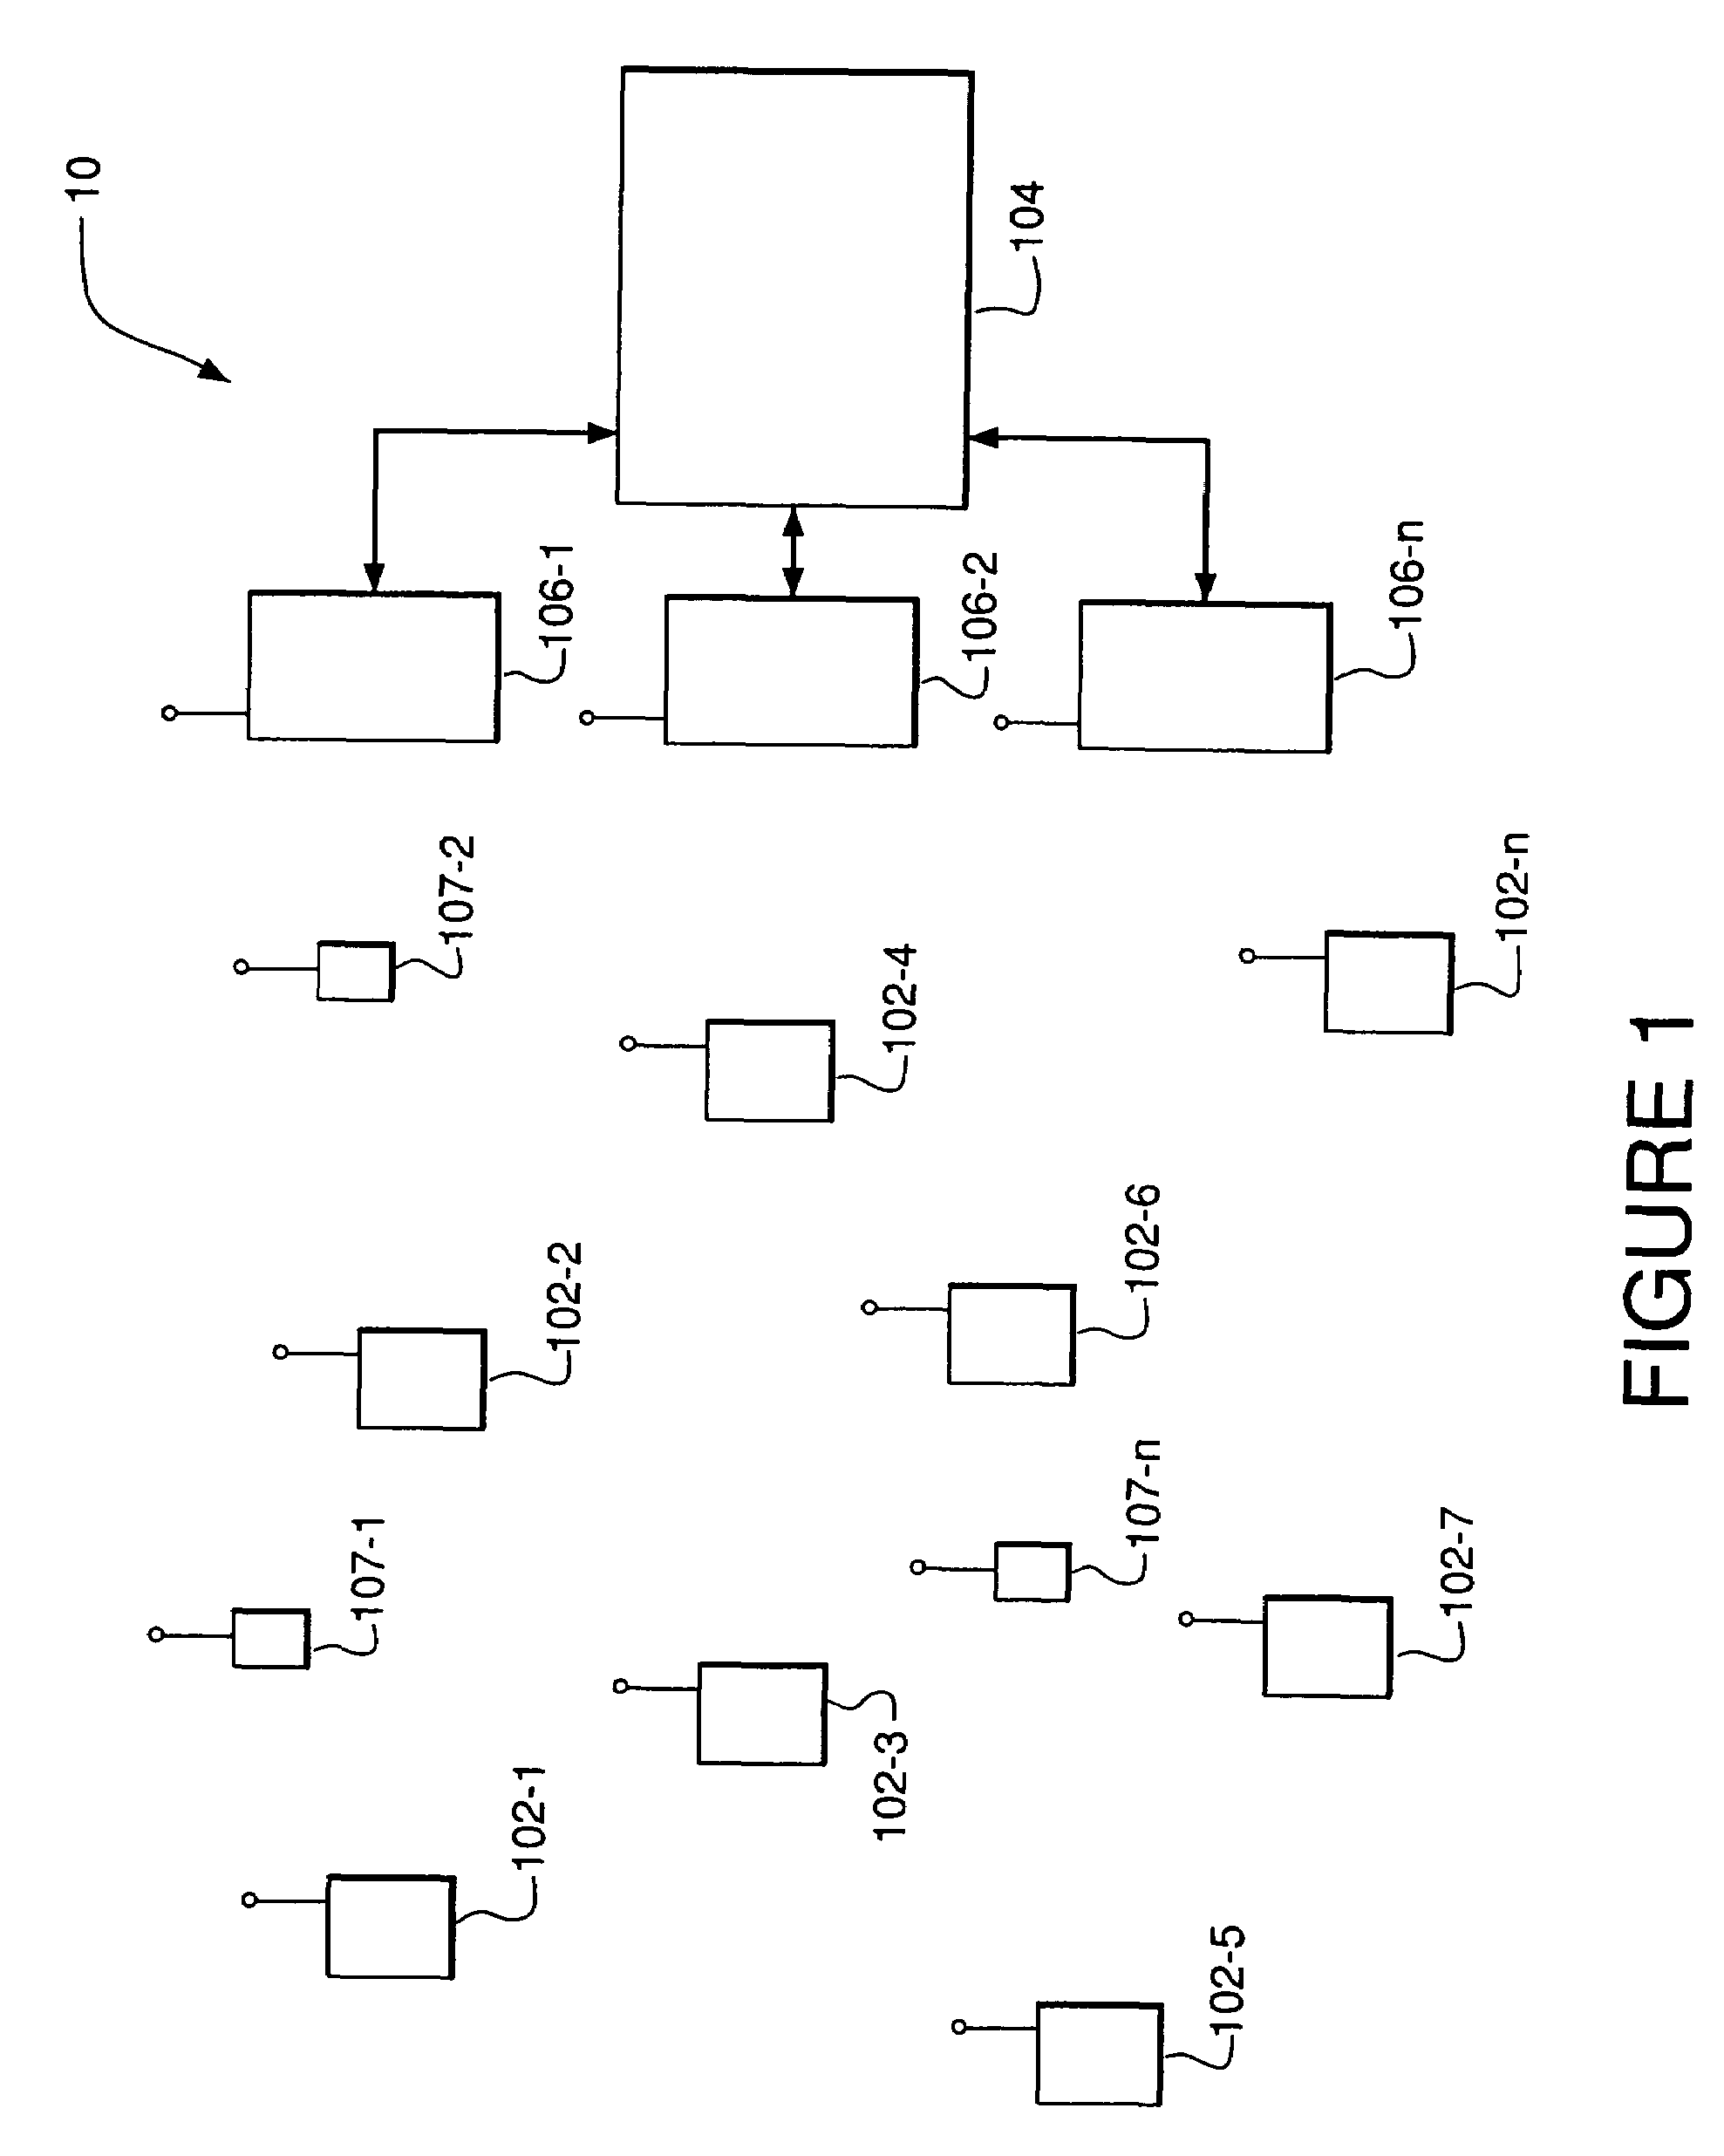 System and method for a routing device to securely share network data with a host utilizing a hardware firewall